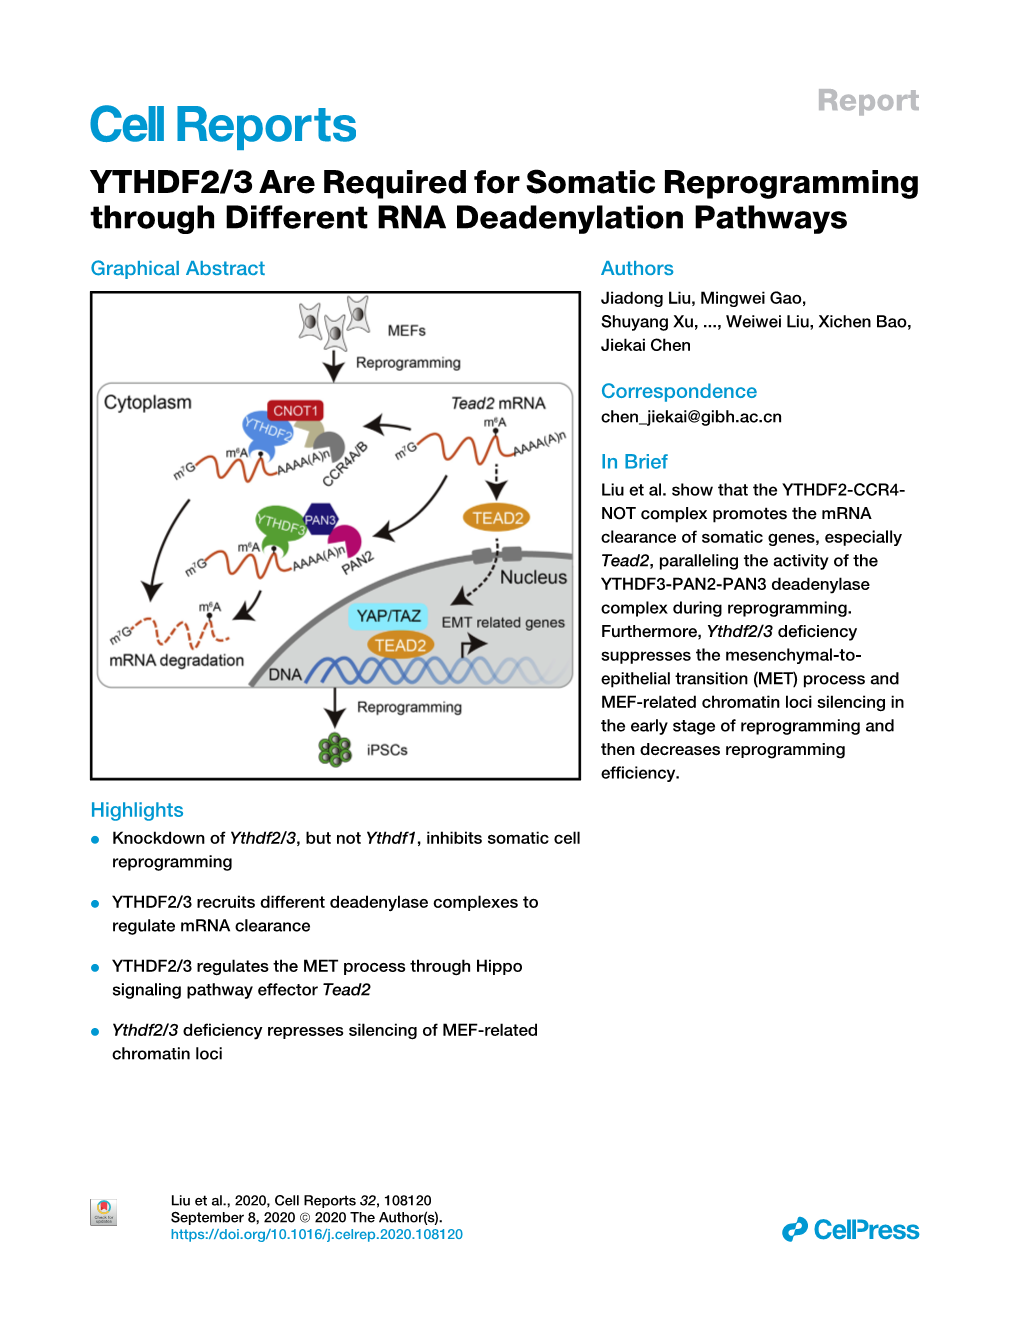 YTHDF2/3 Are Required for Somatic Reprogramming Through Different RNA Deadenylation Pathways